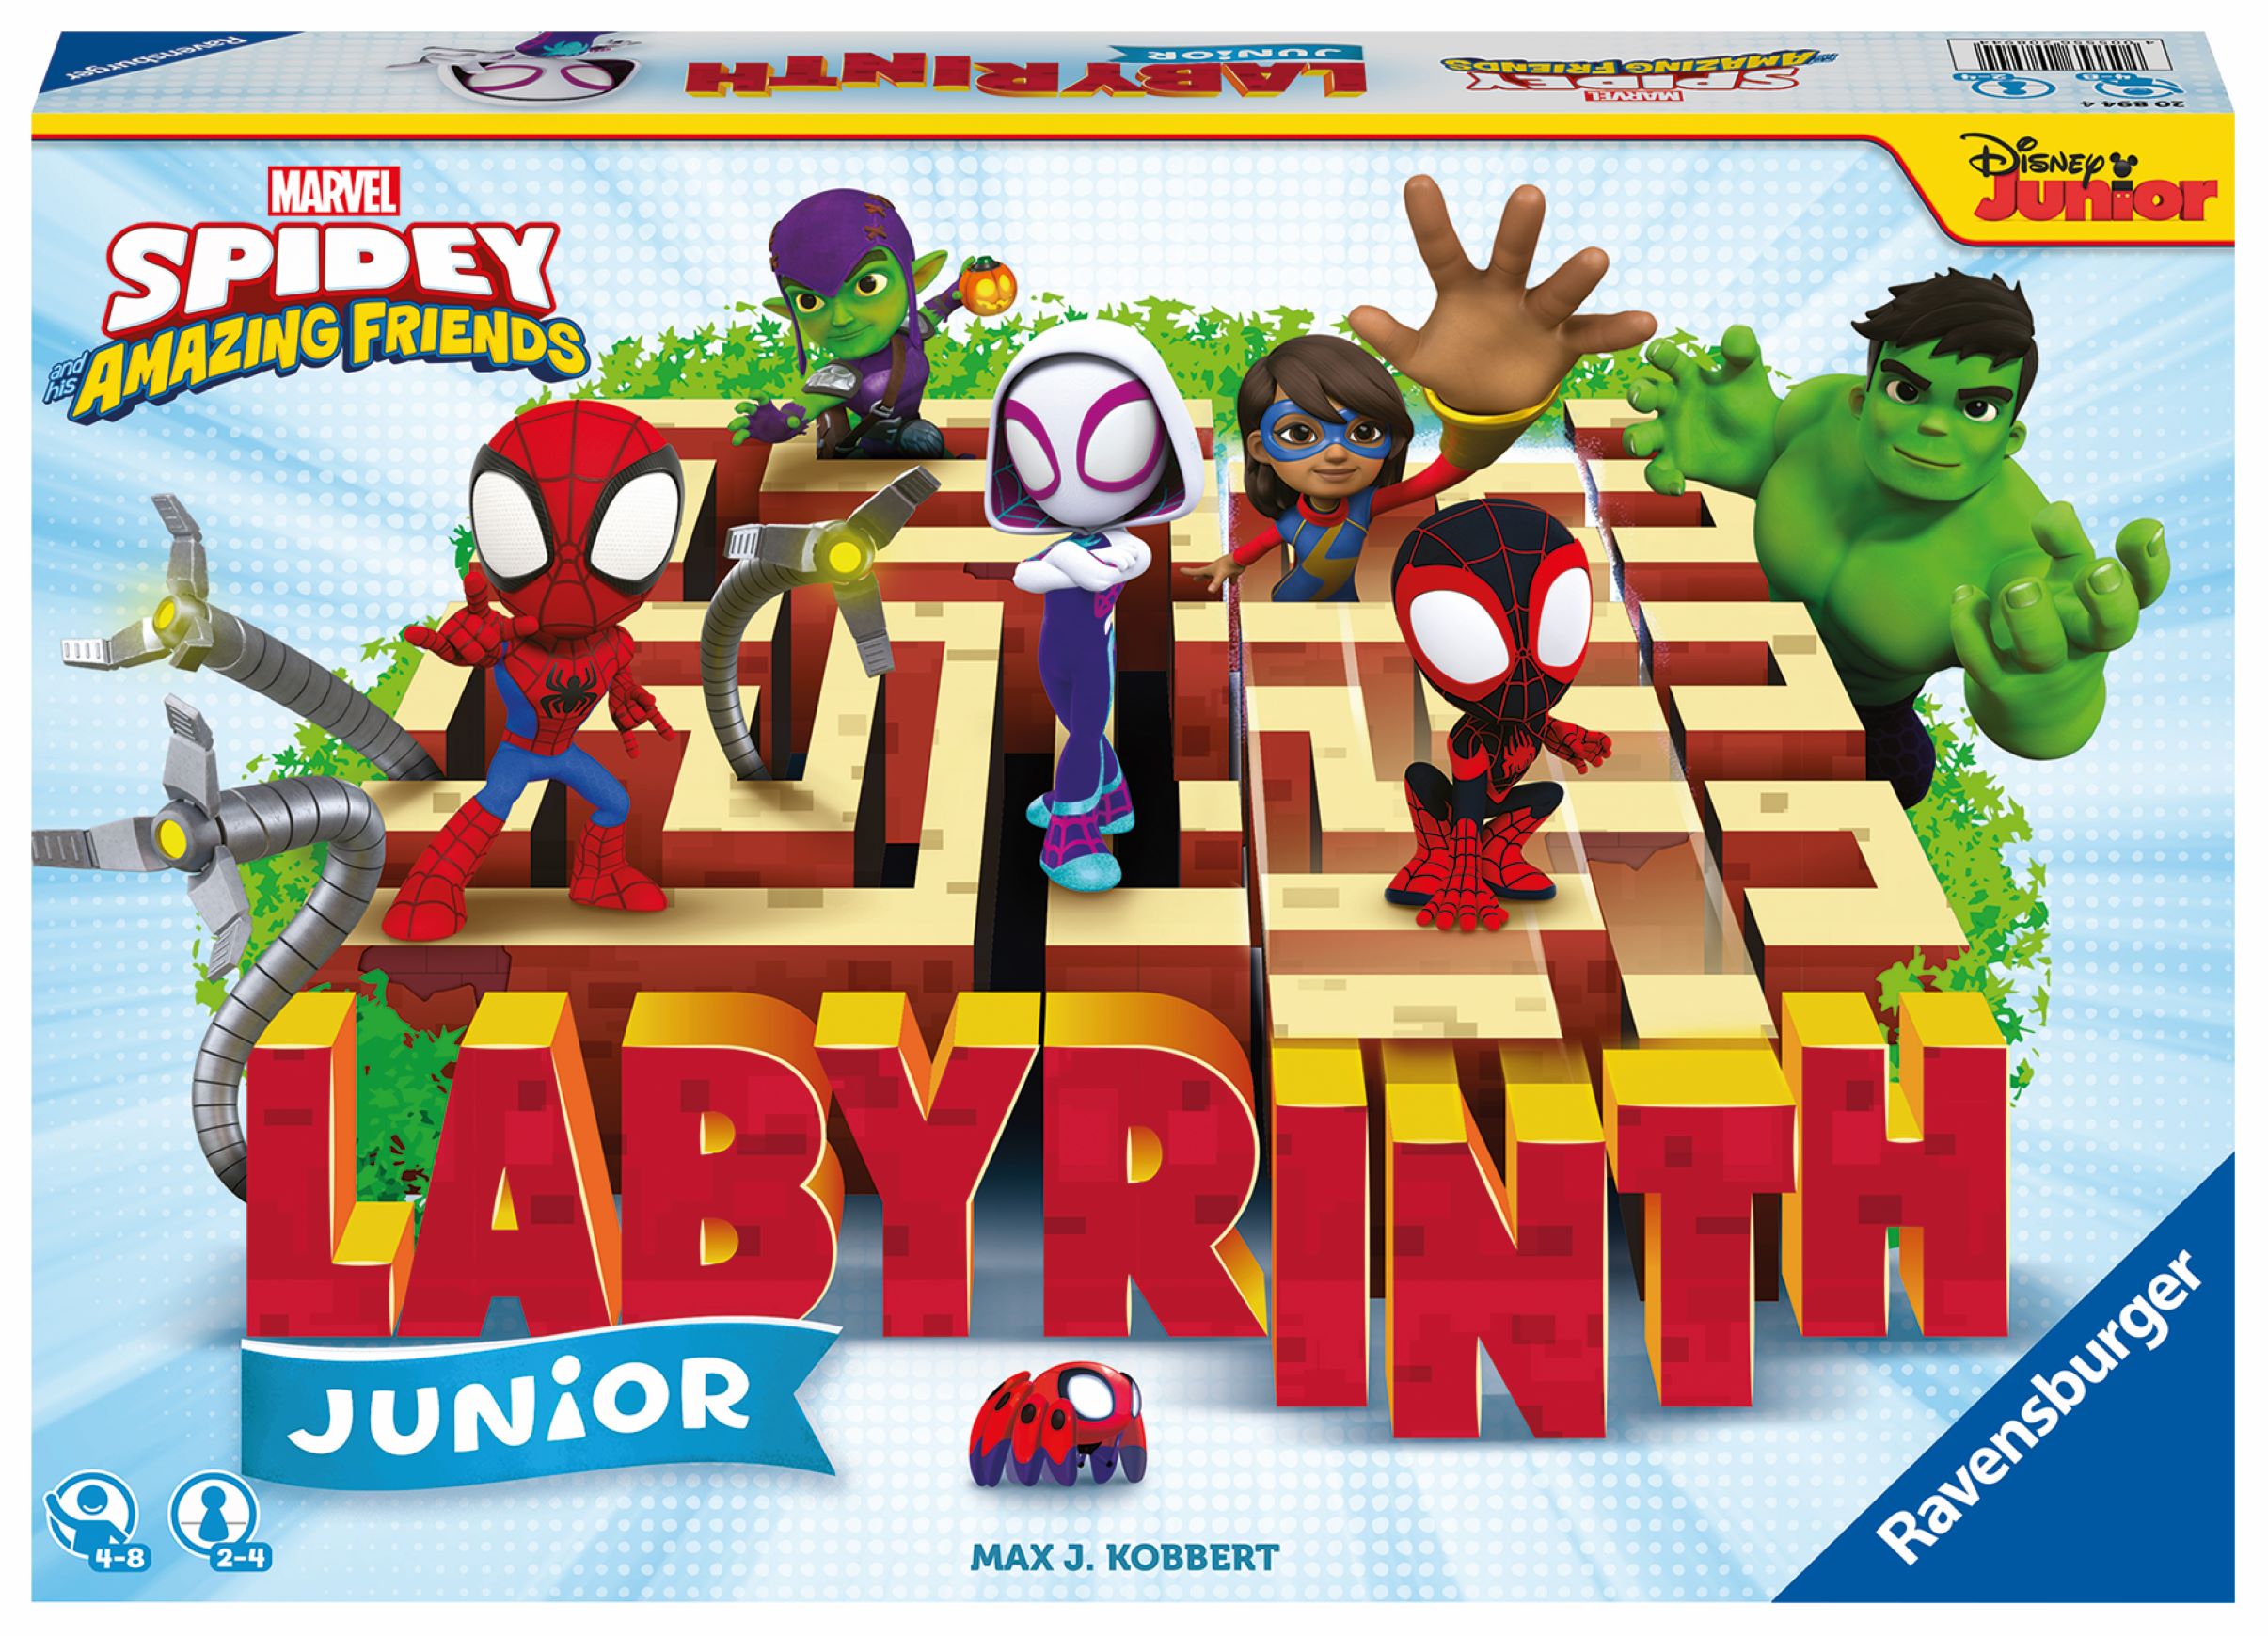 Spidey and his Amazing Friends Labyrinth Junior